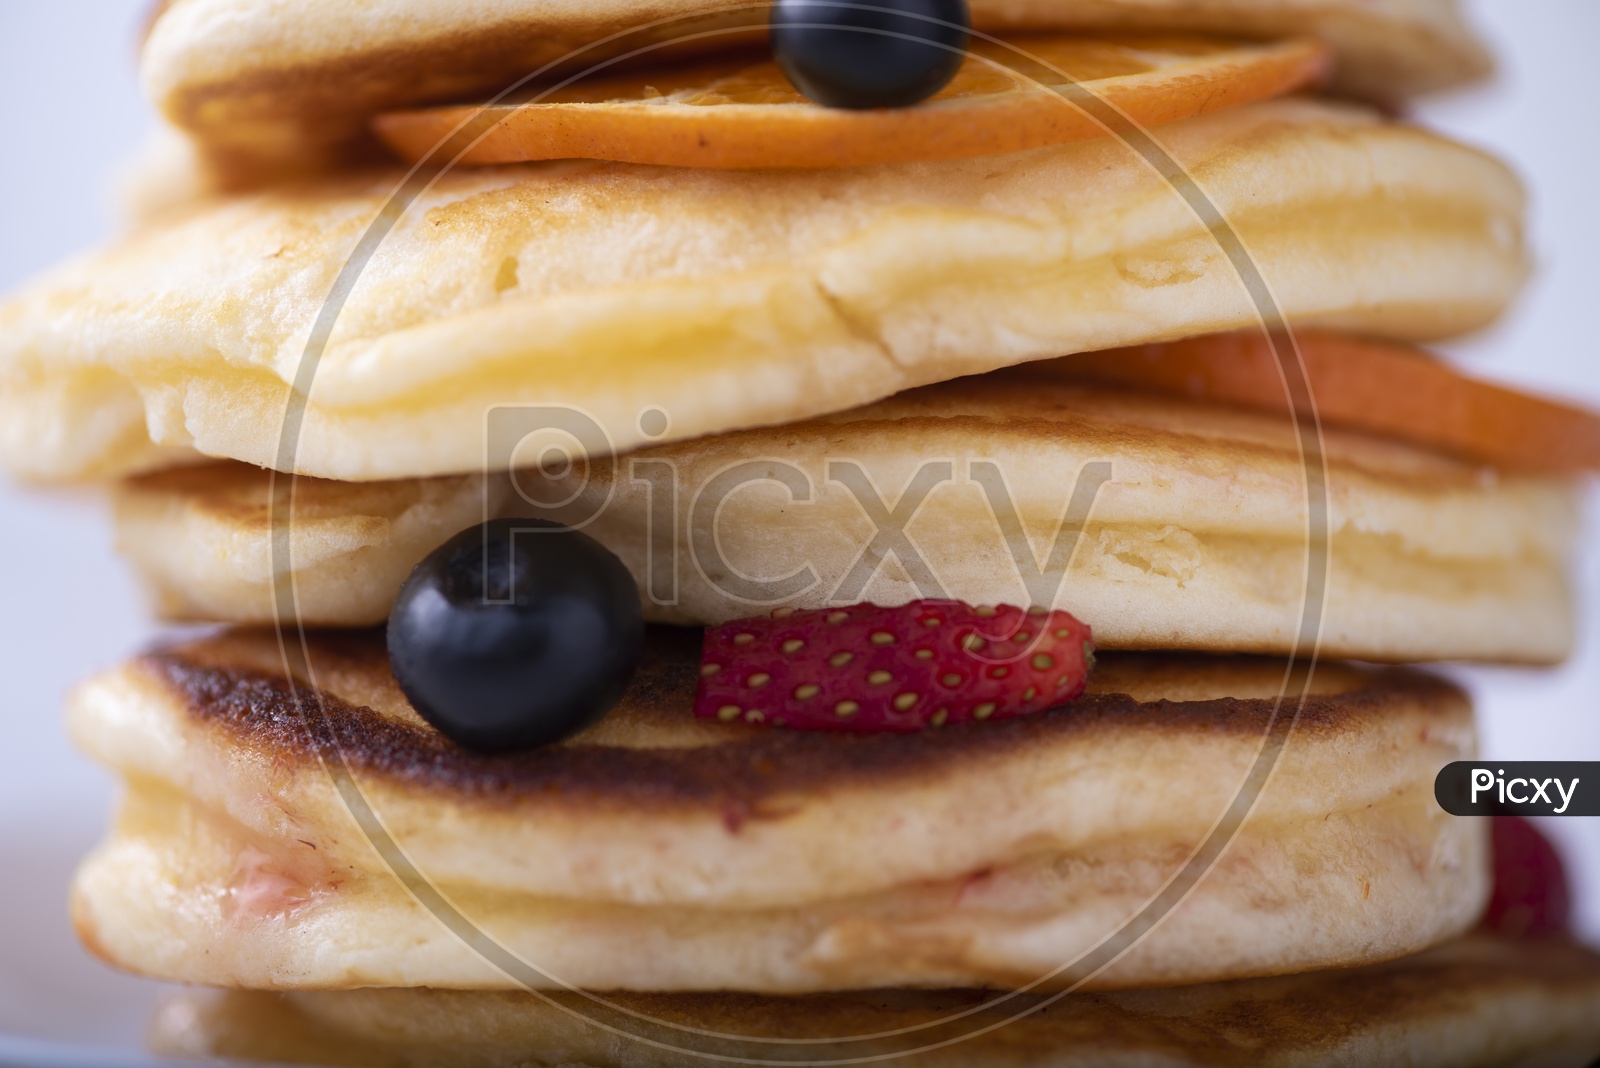 pancake stack with strawberry, blueberry, and orange